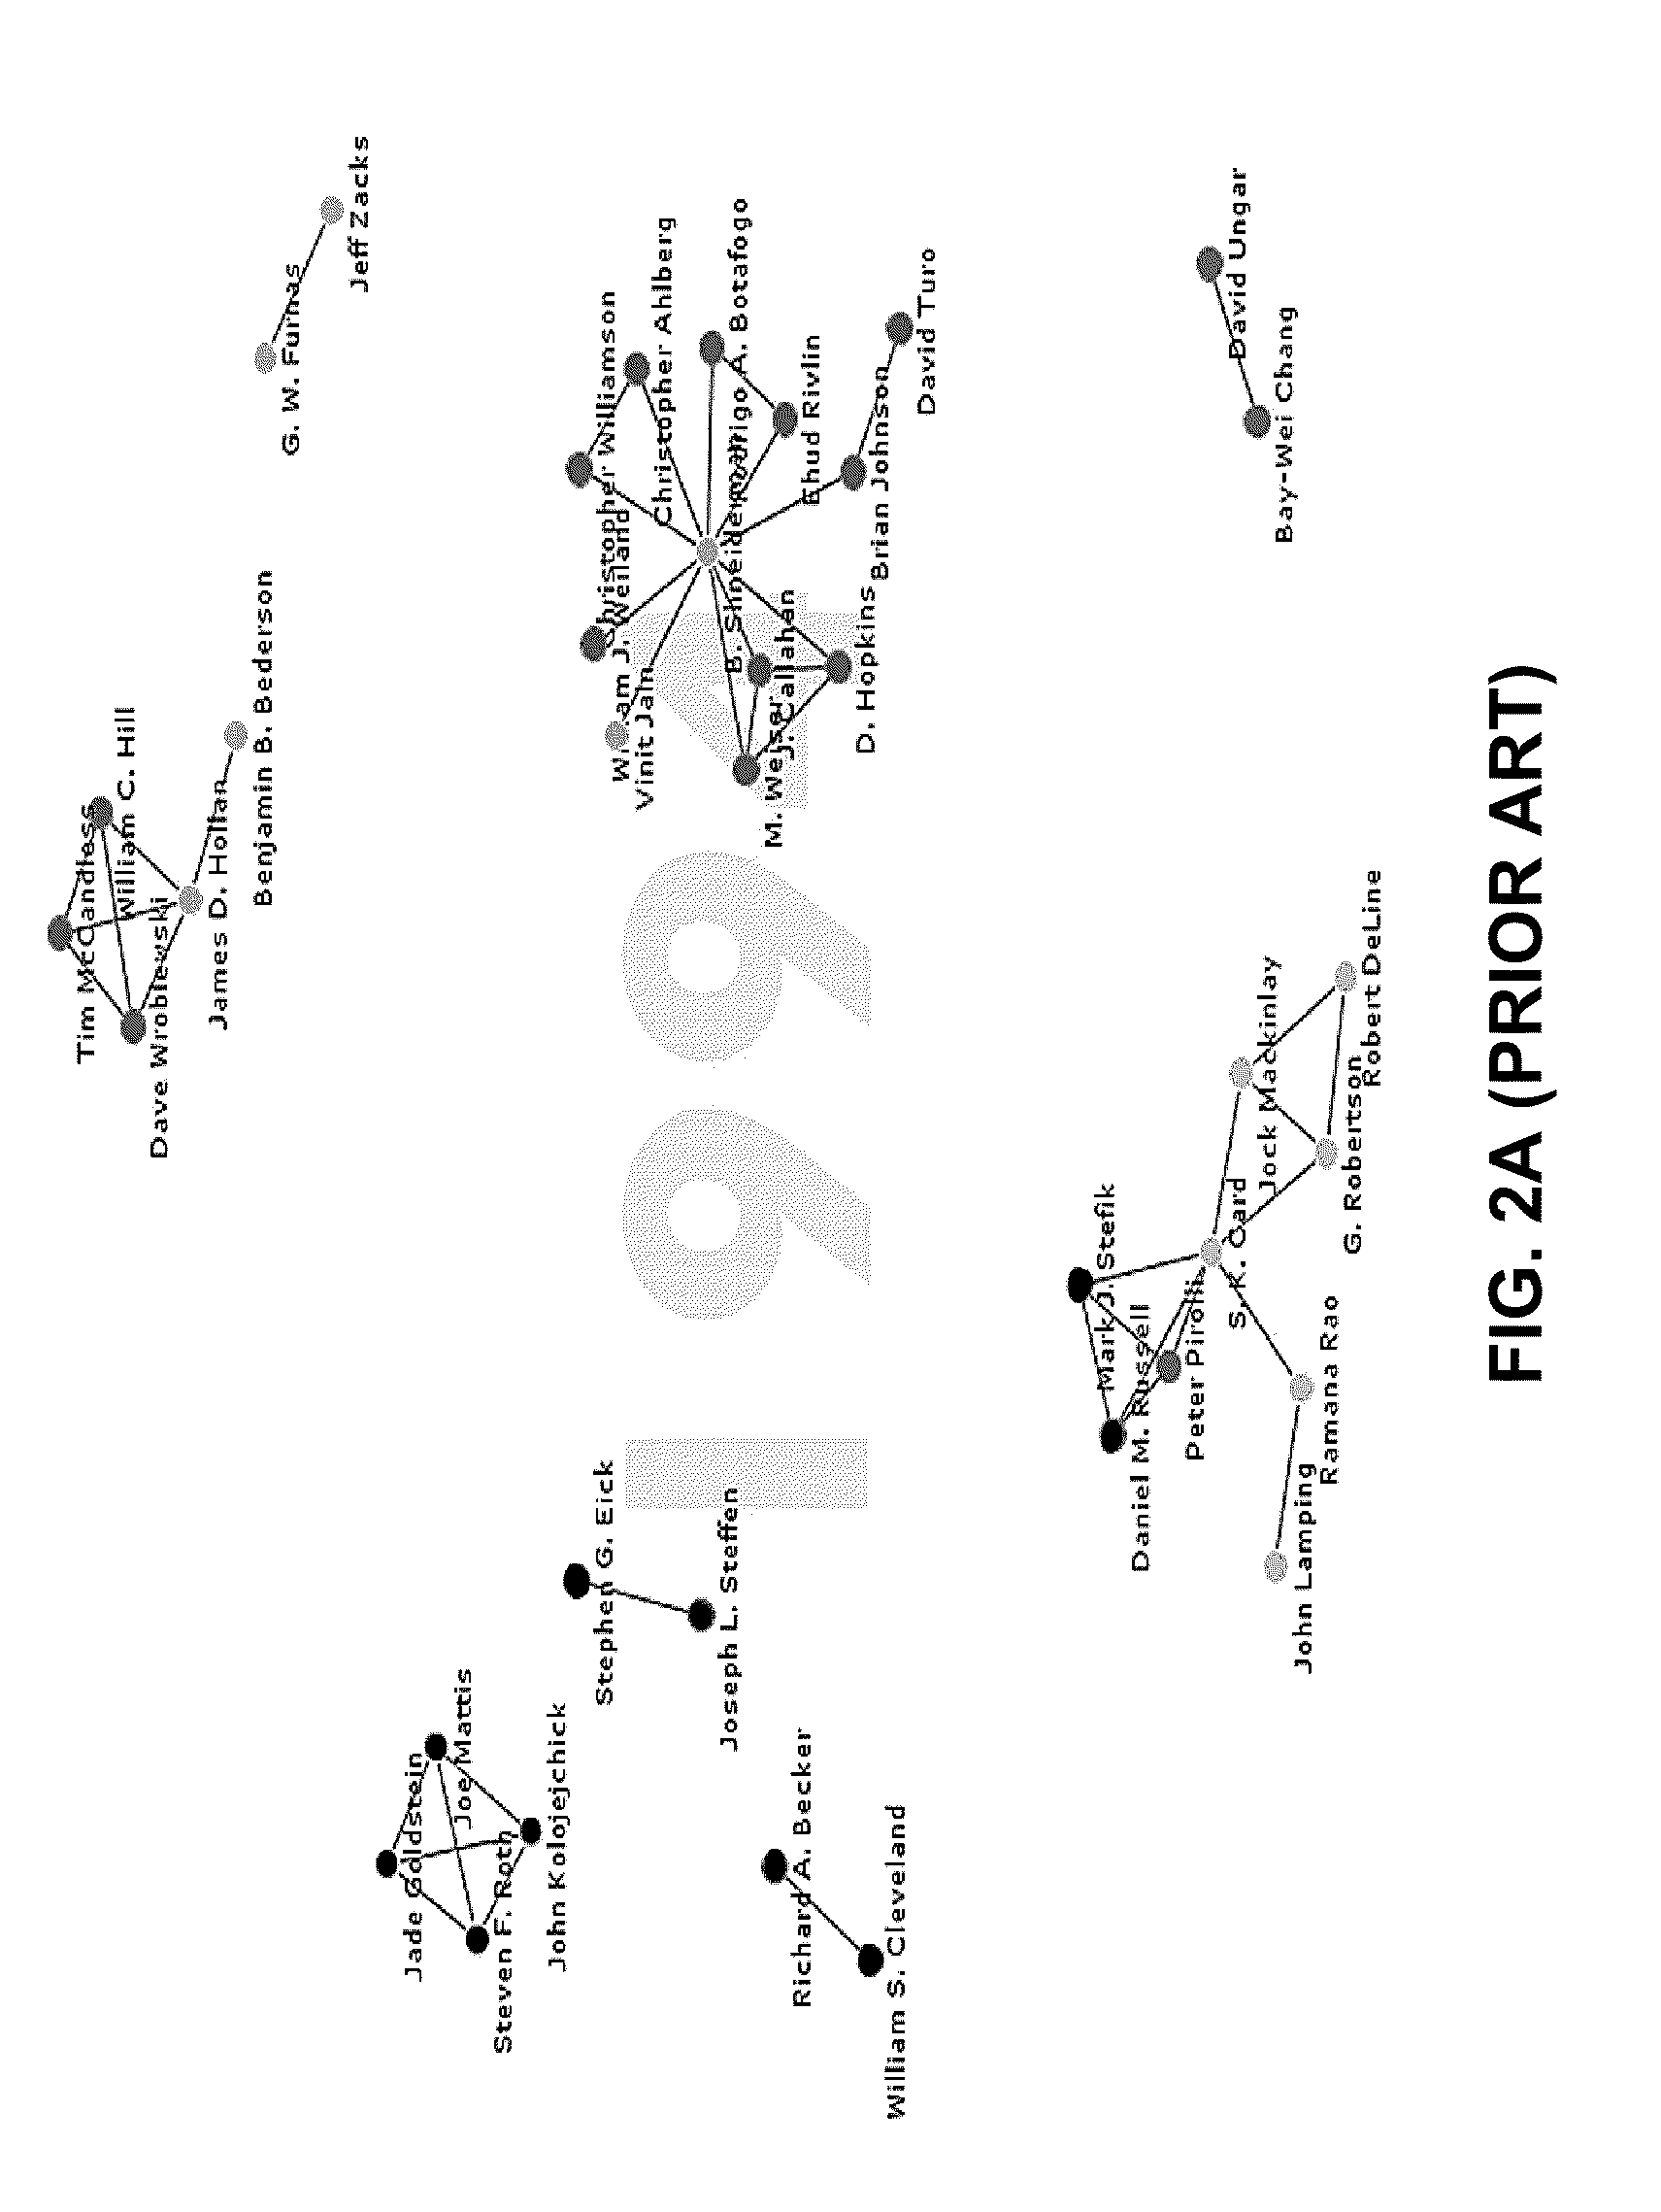 Method and apparatus for processing network visualization